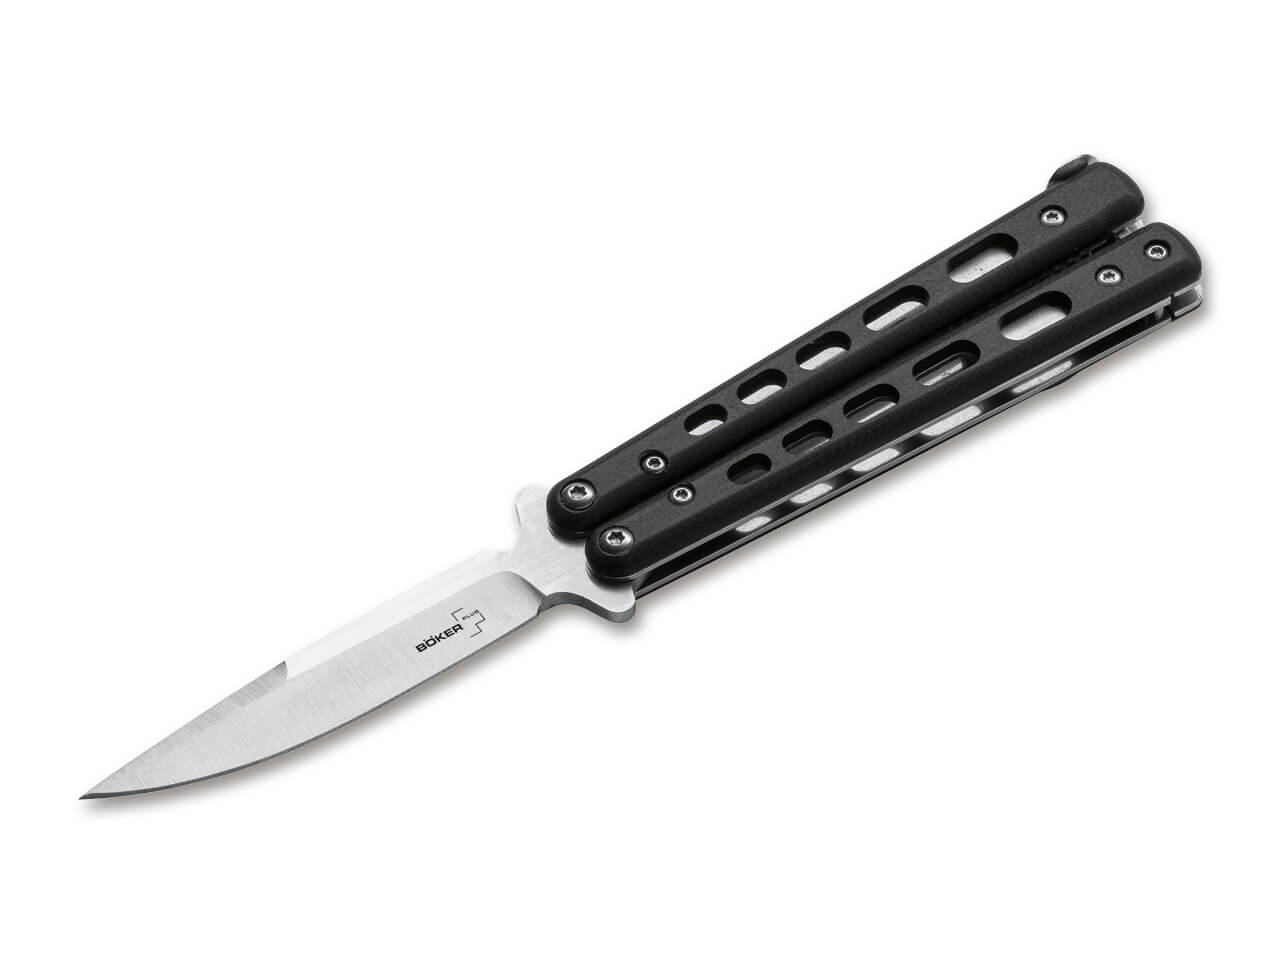 Boker Plus Balisong - Black G10 - Small Butterfly Knife - 06EX226